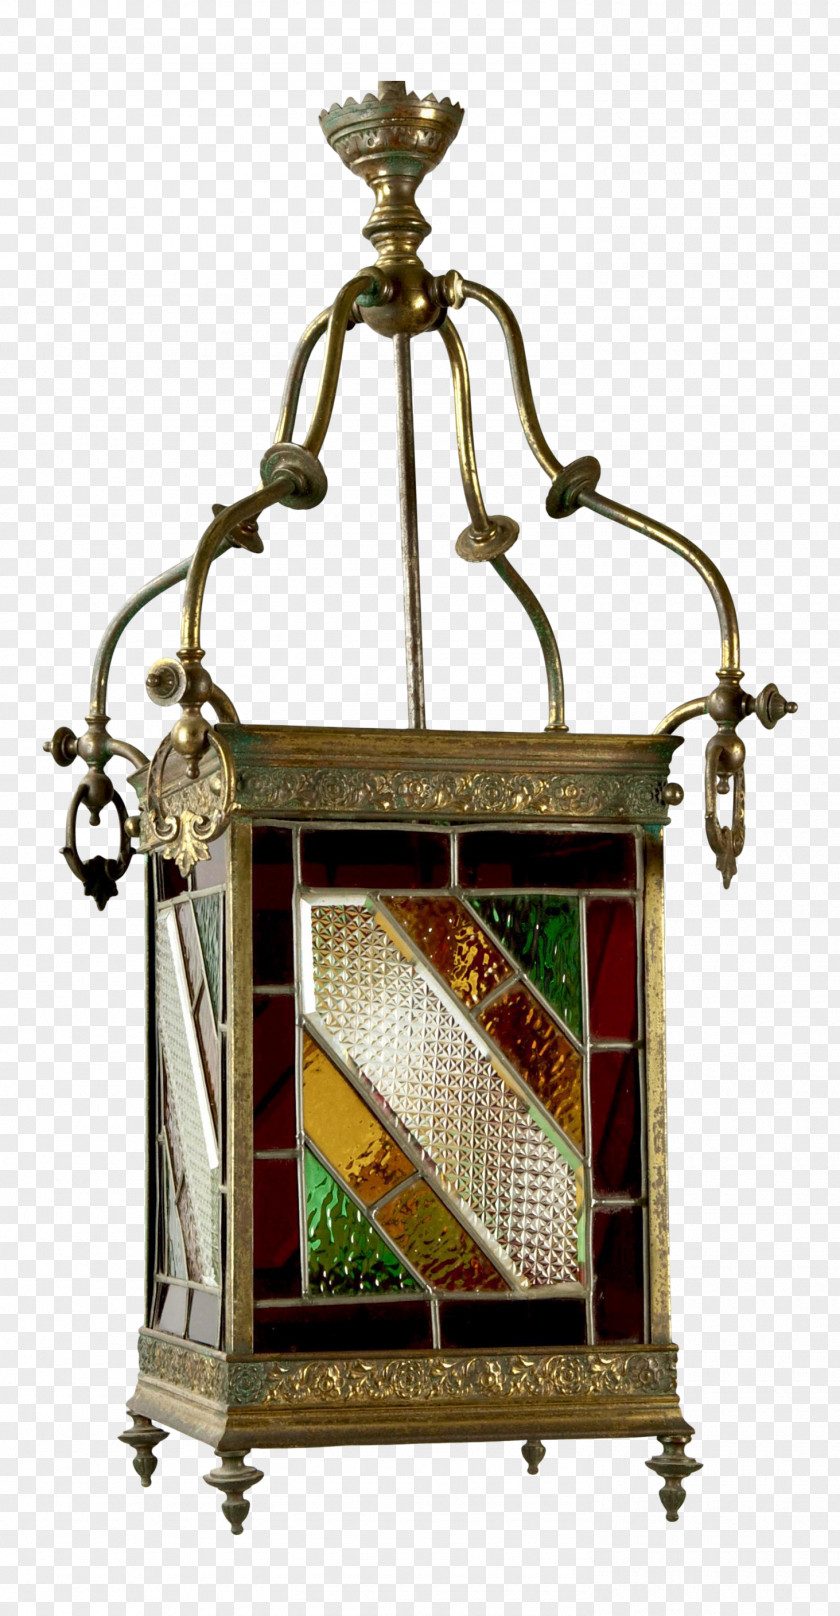 Window Light Fixture Stained Glass Lantern PNG